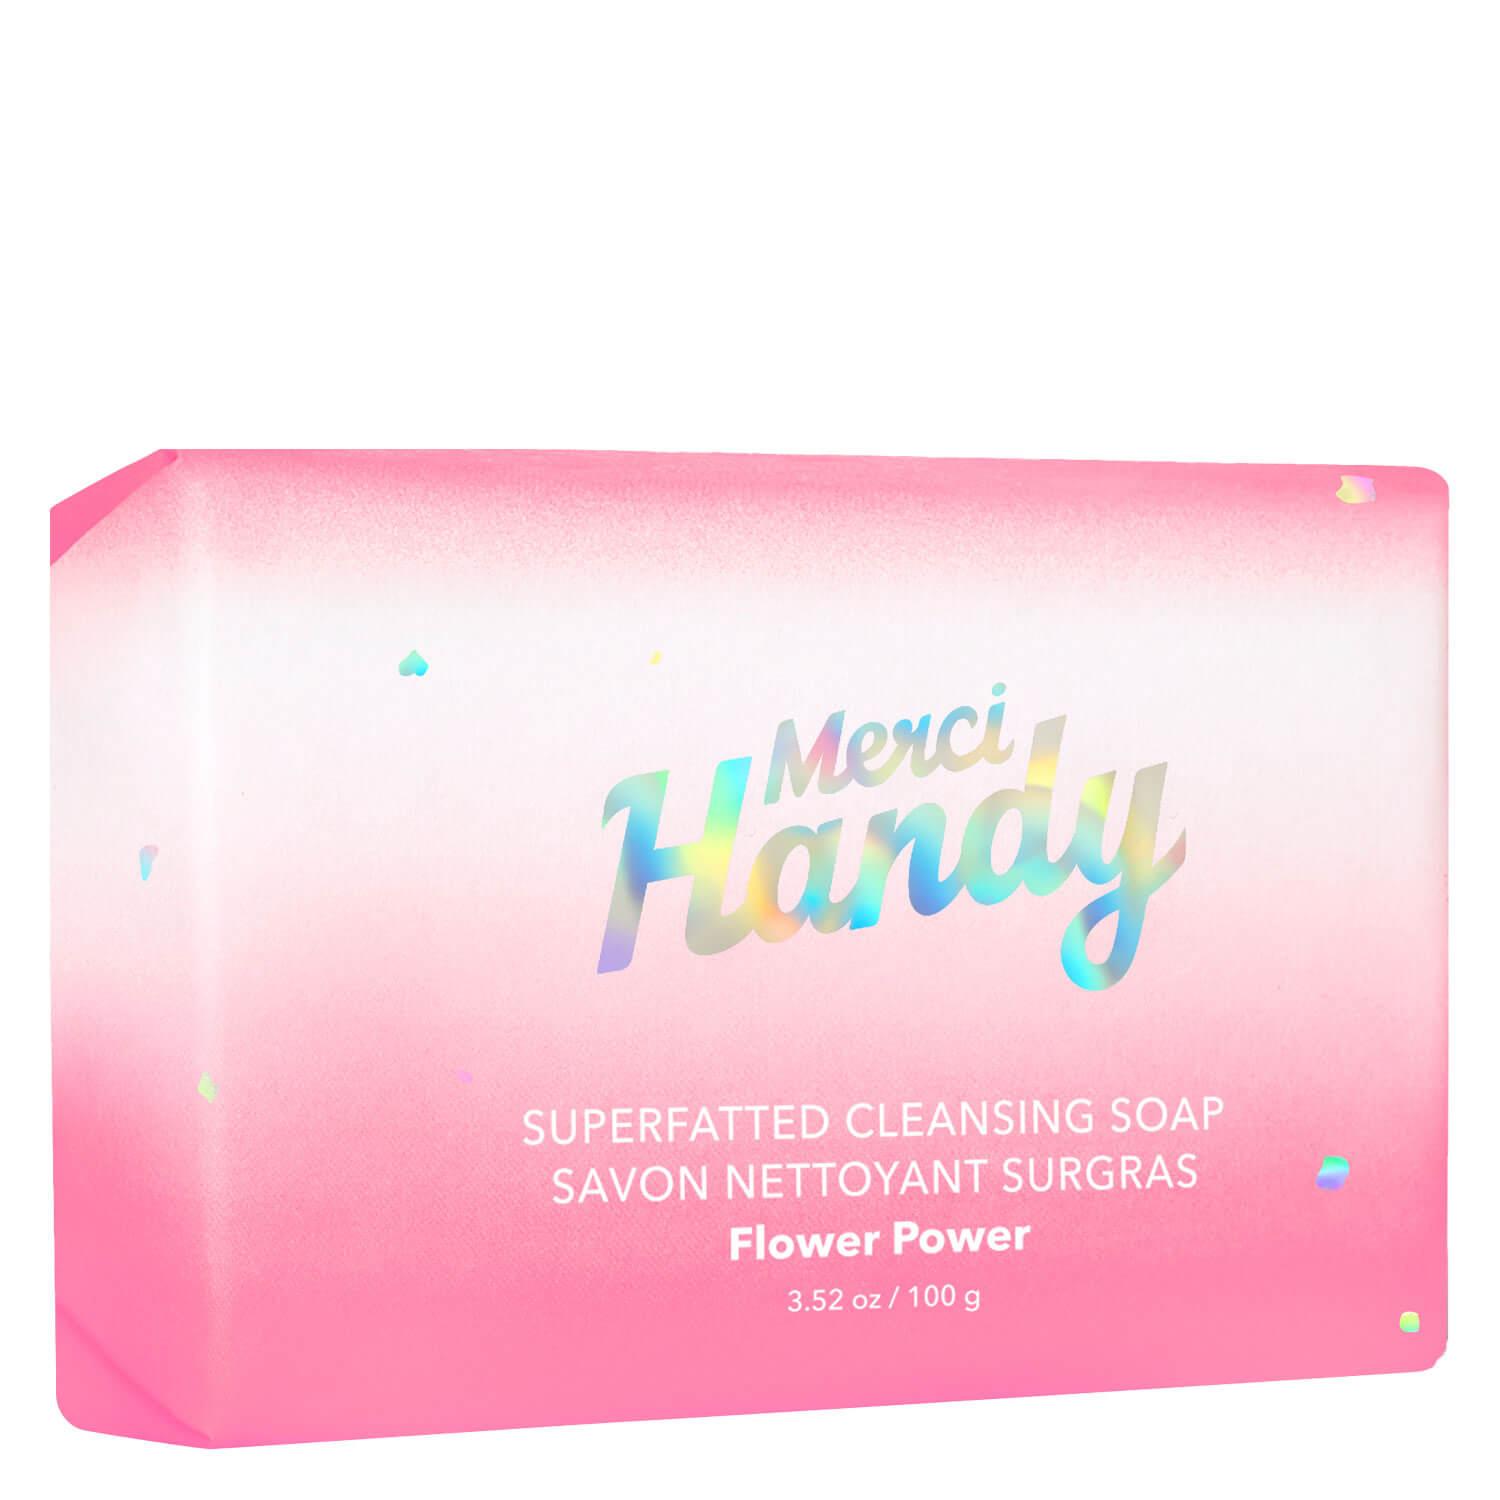 Merci Handy - Superfatted Cleansing Soap Flower Power